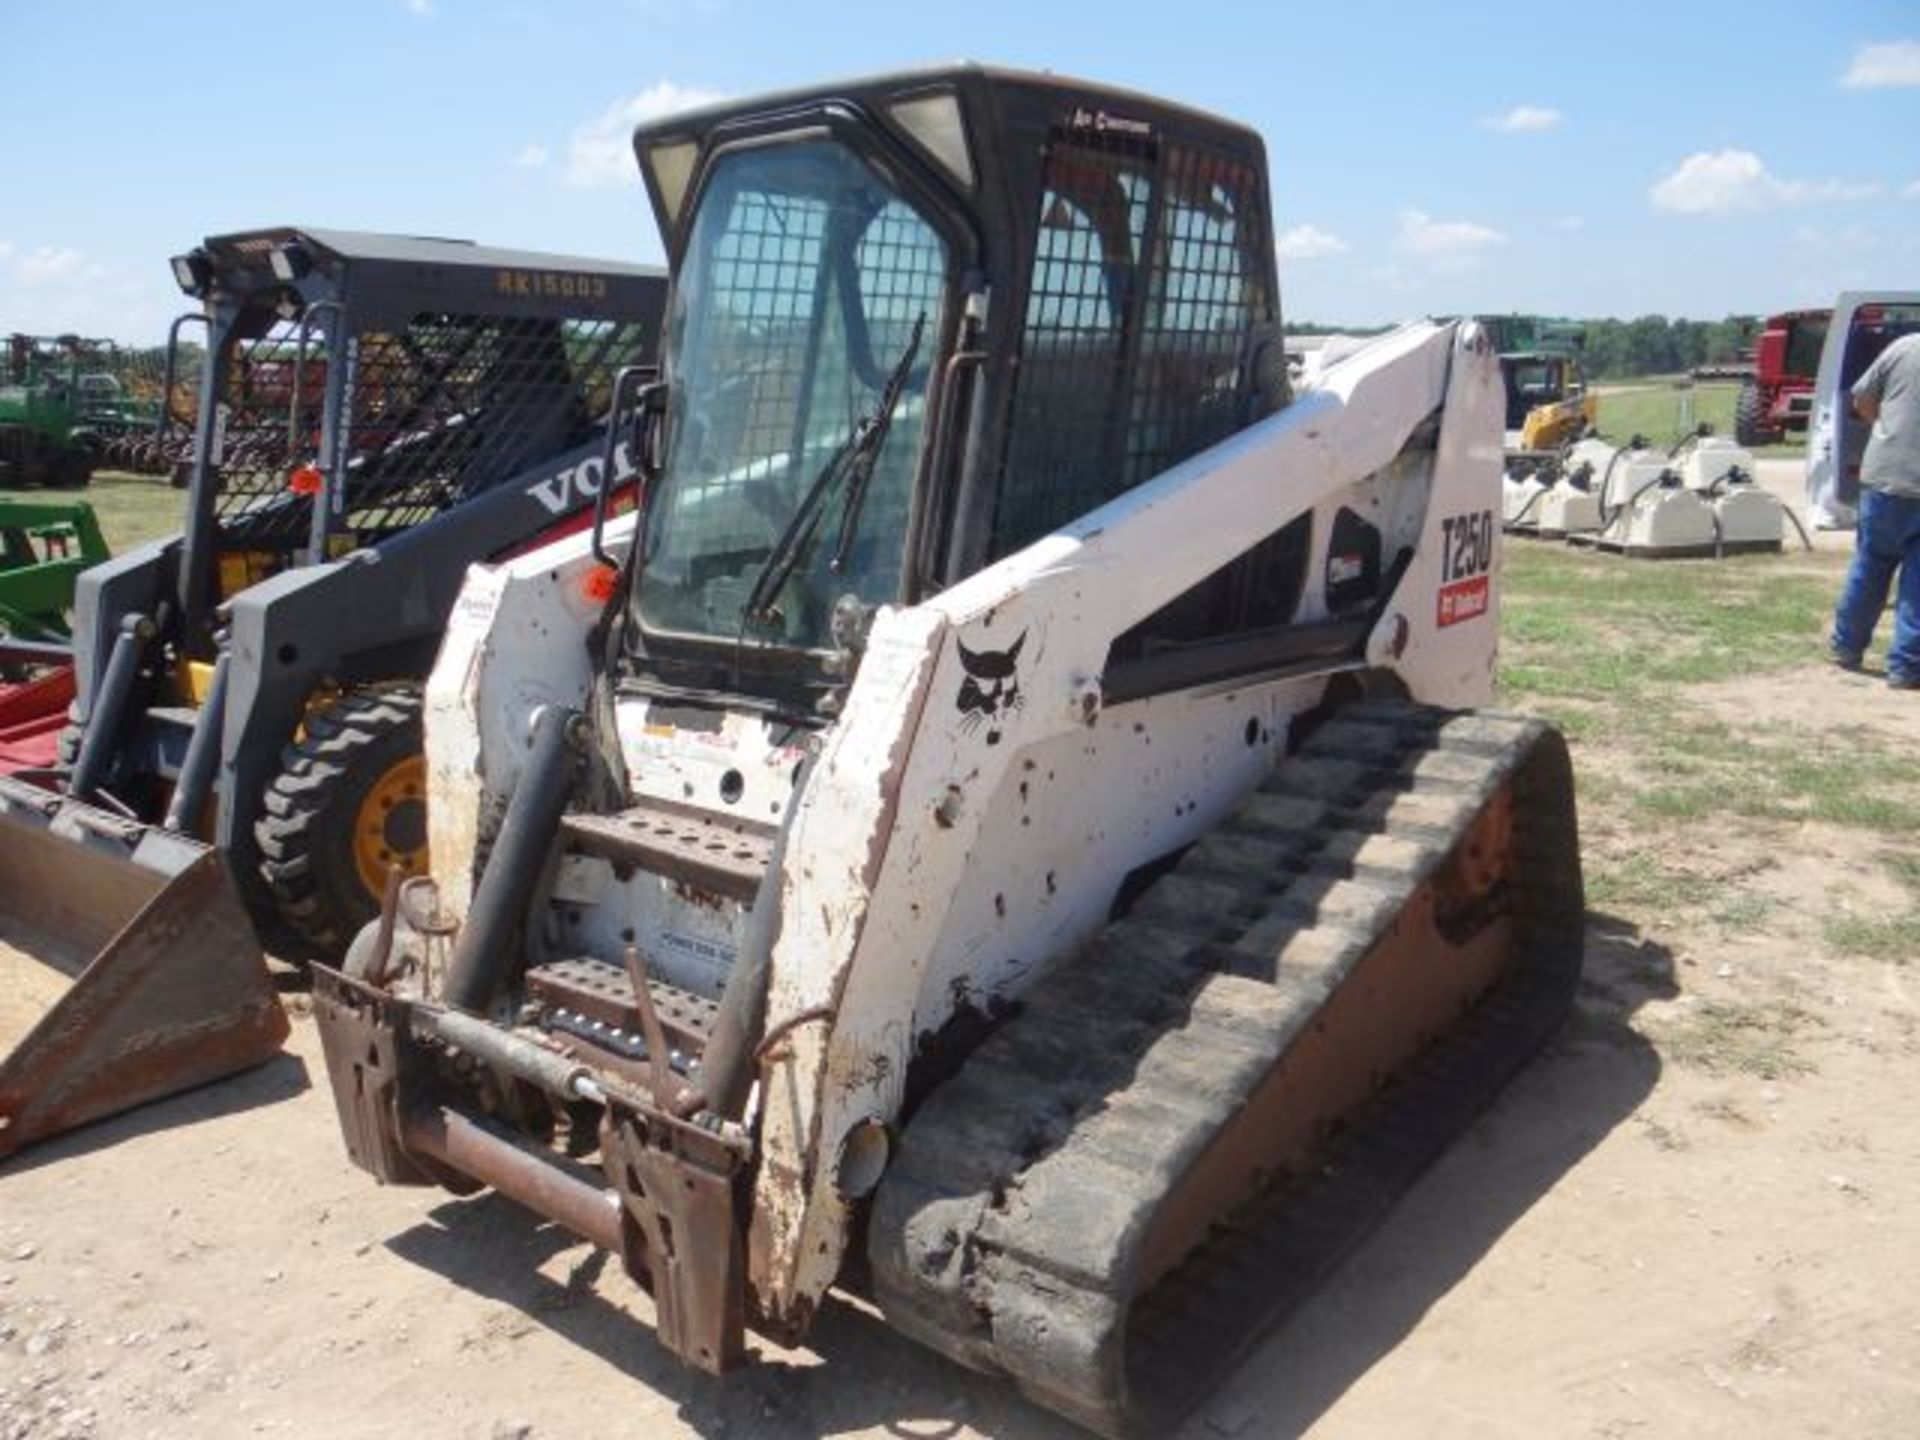 BobCat T250 Skid Steer, 2006 #112062, 4717 hrs, Switchable ISO and H Pattern Controls, CAH, 84"